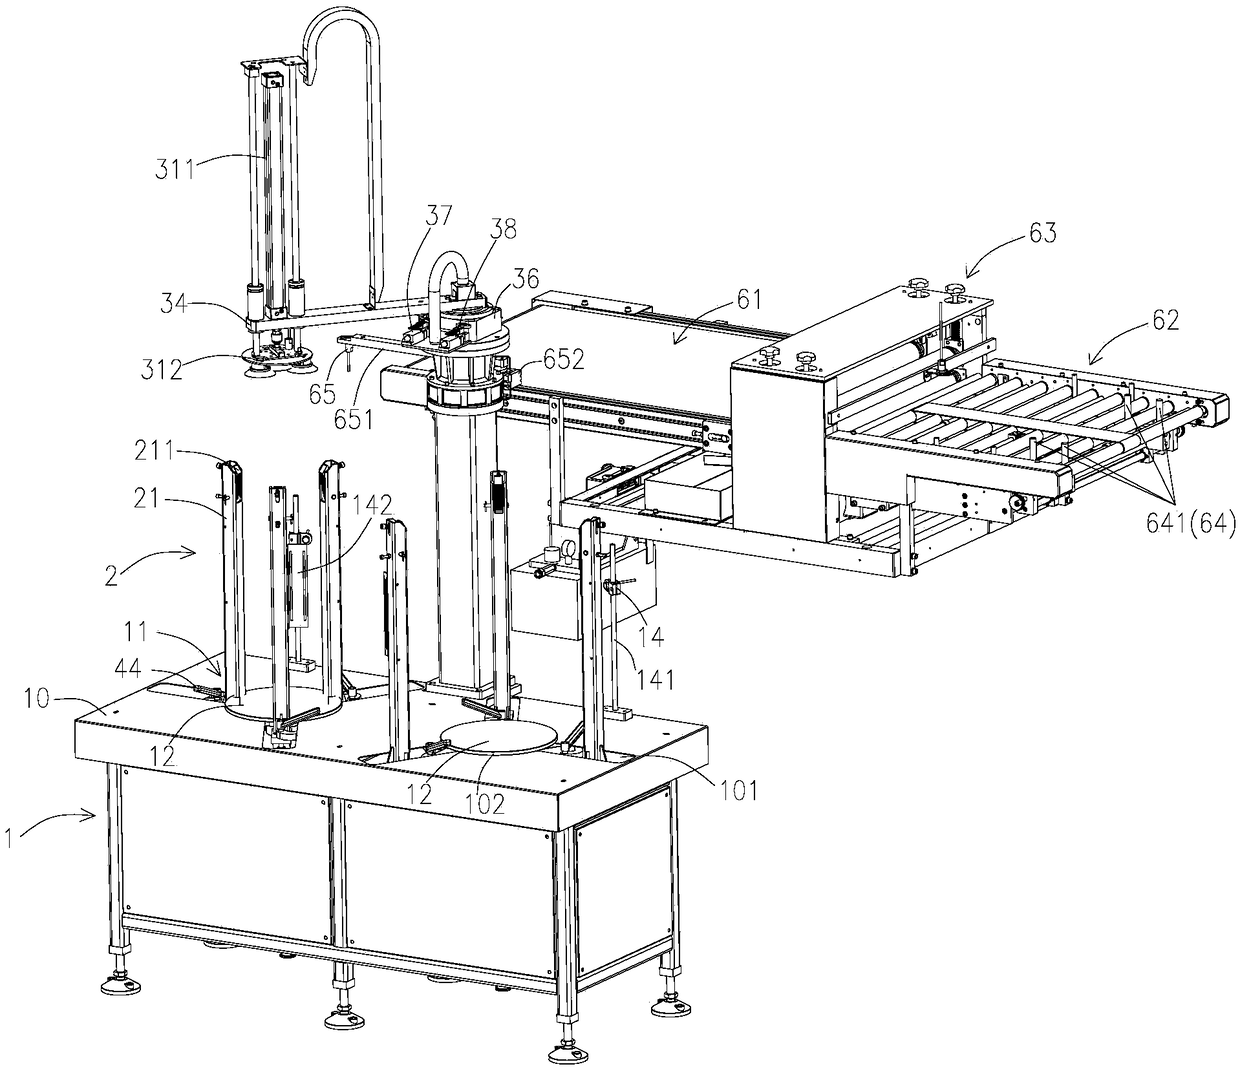 Multi-station sheet loading device and punching production line